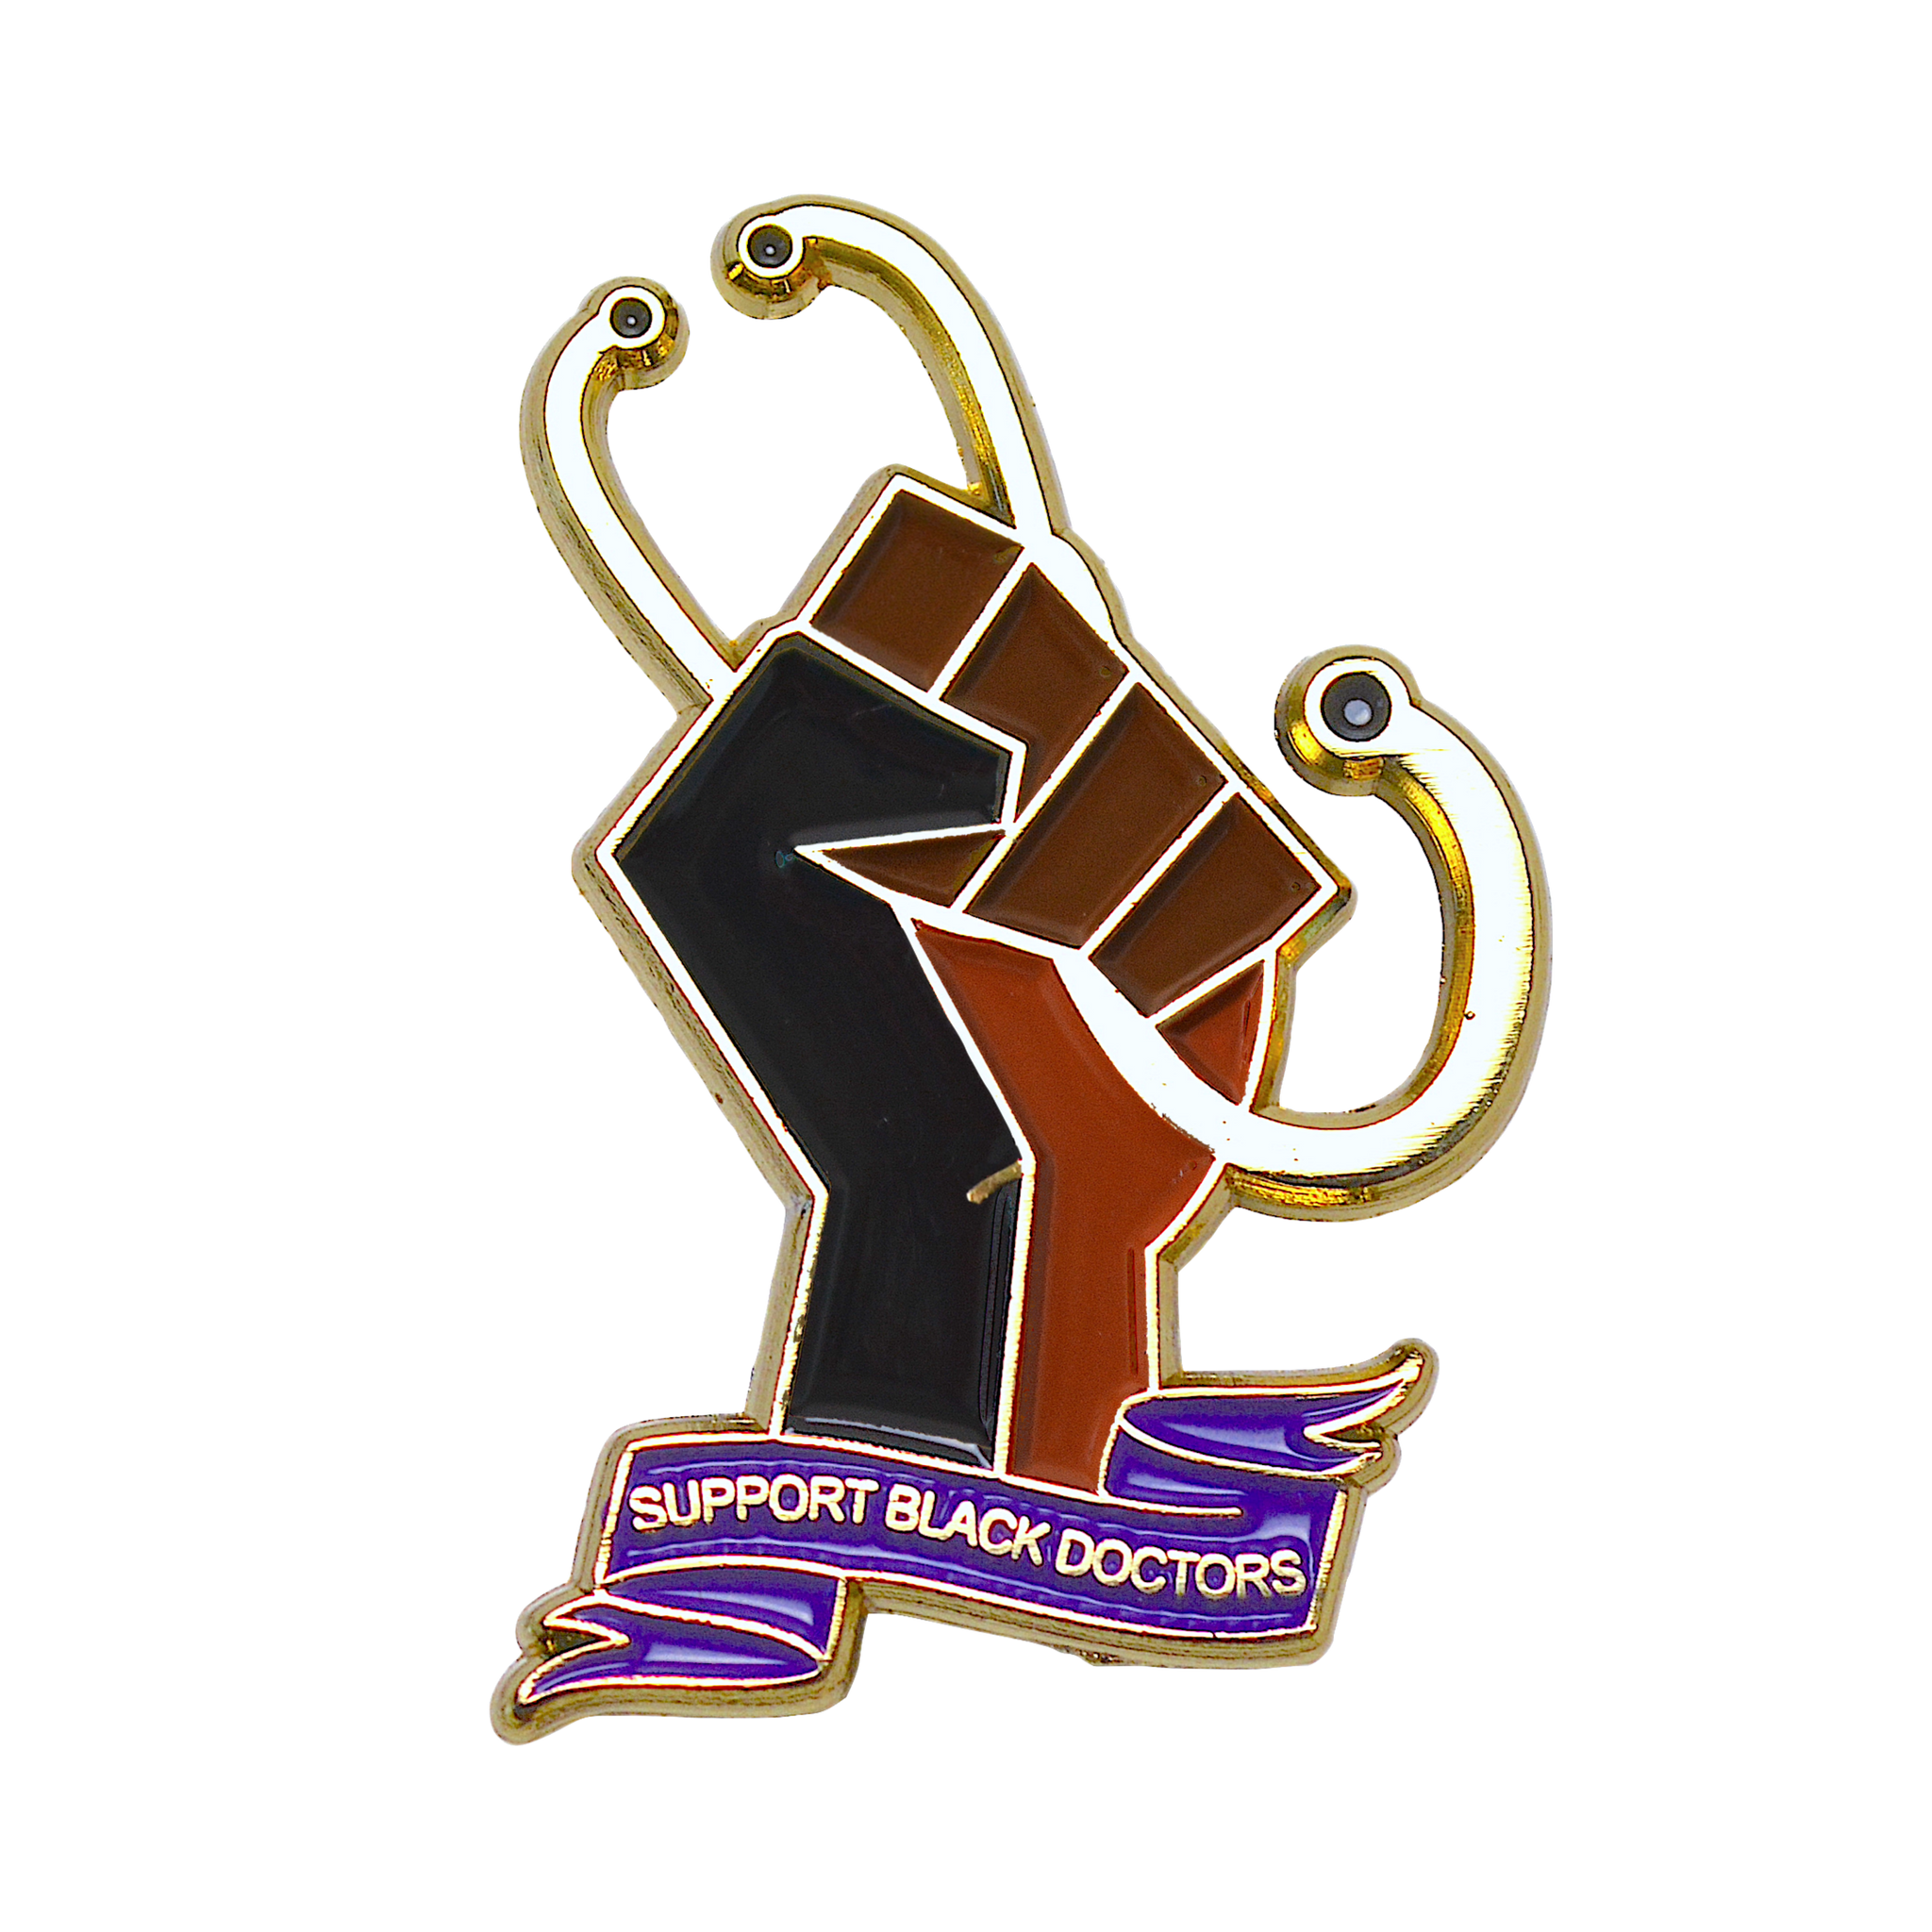 "Support Black Doctors" Fist Pin